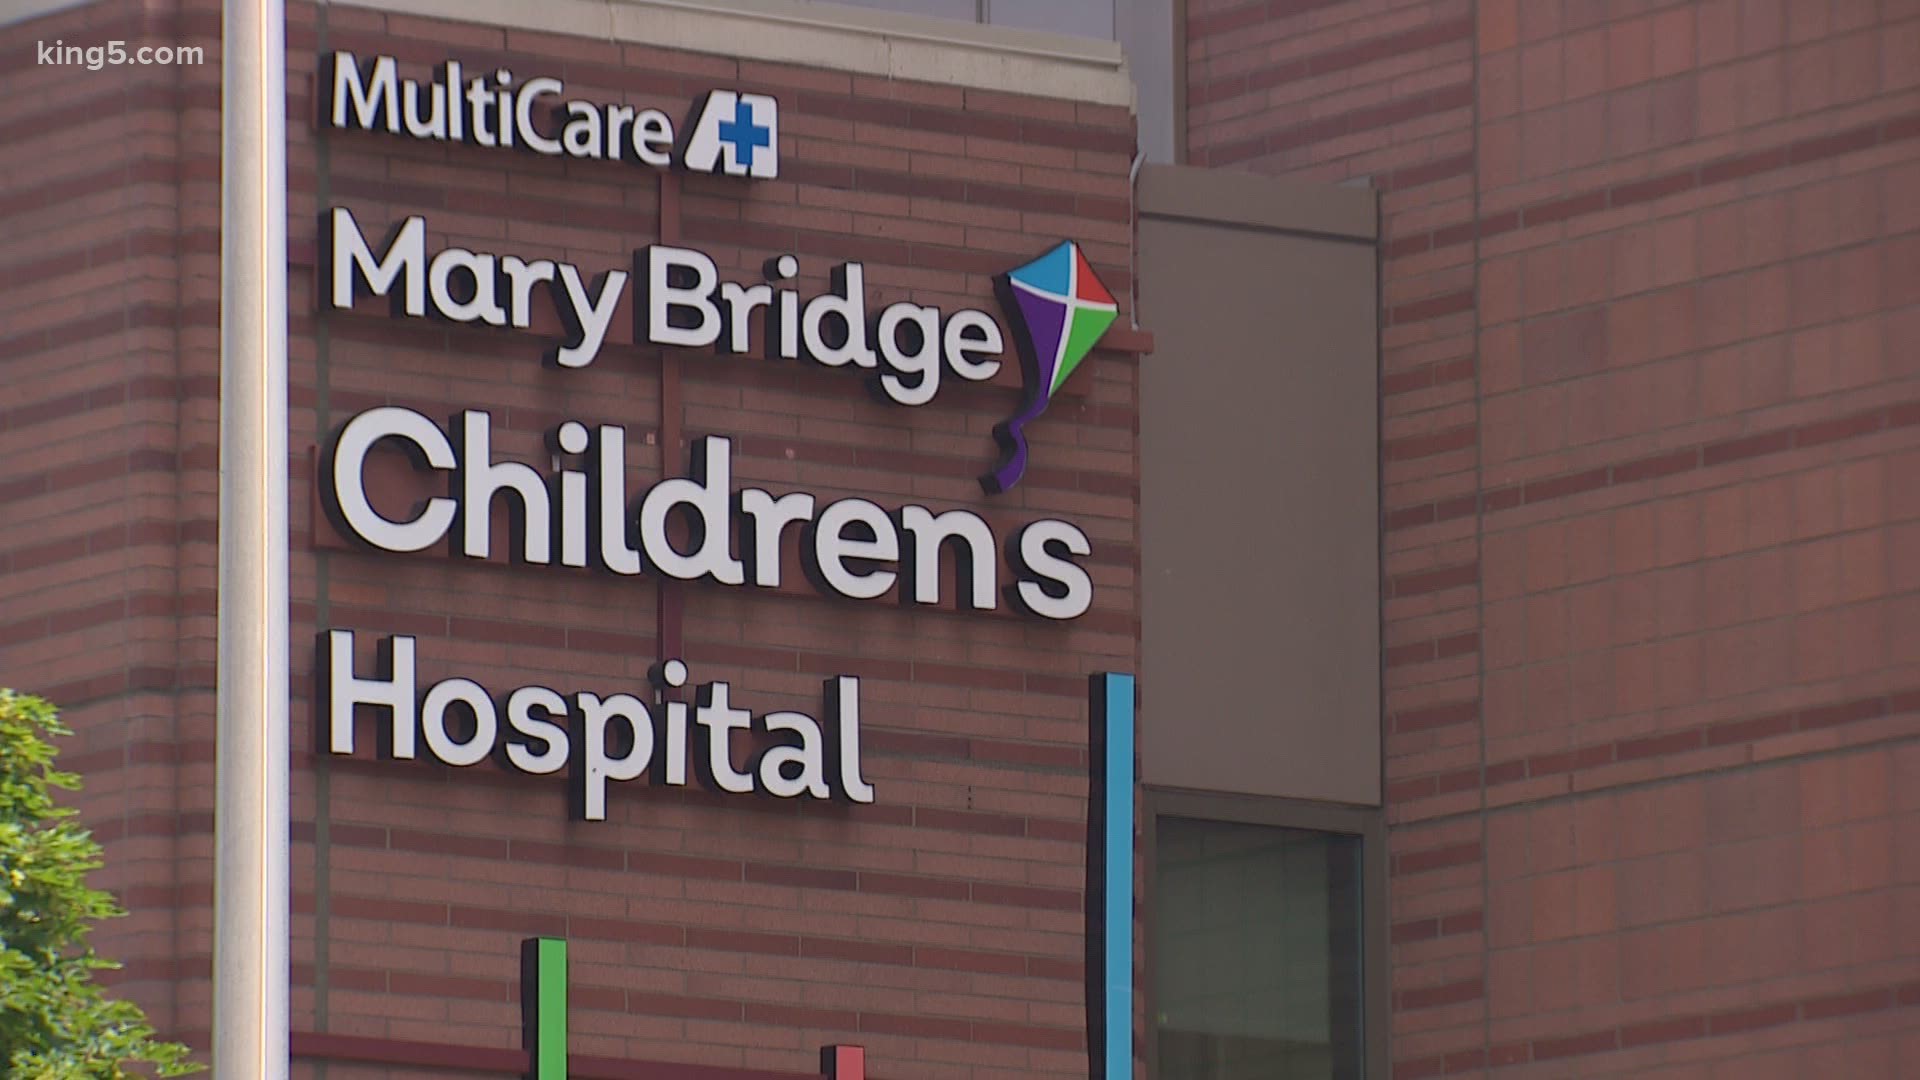 Mary Bridge Children’s Hospital is moving to a new building that is expected to be completed in 2024. The building will be near MultiCare’s current Tacoma campus.